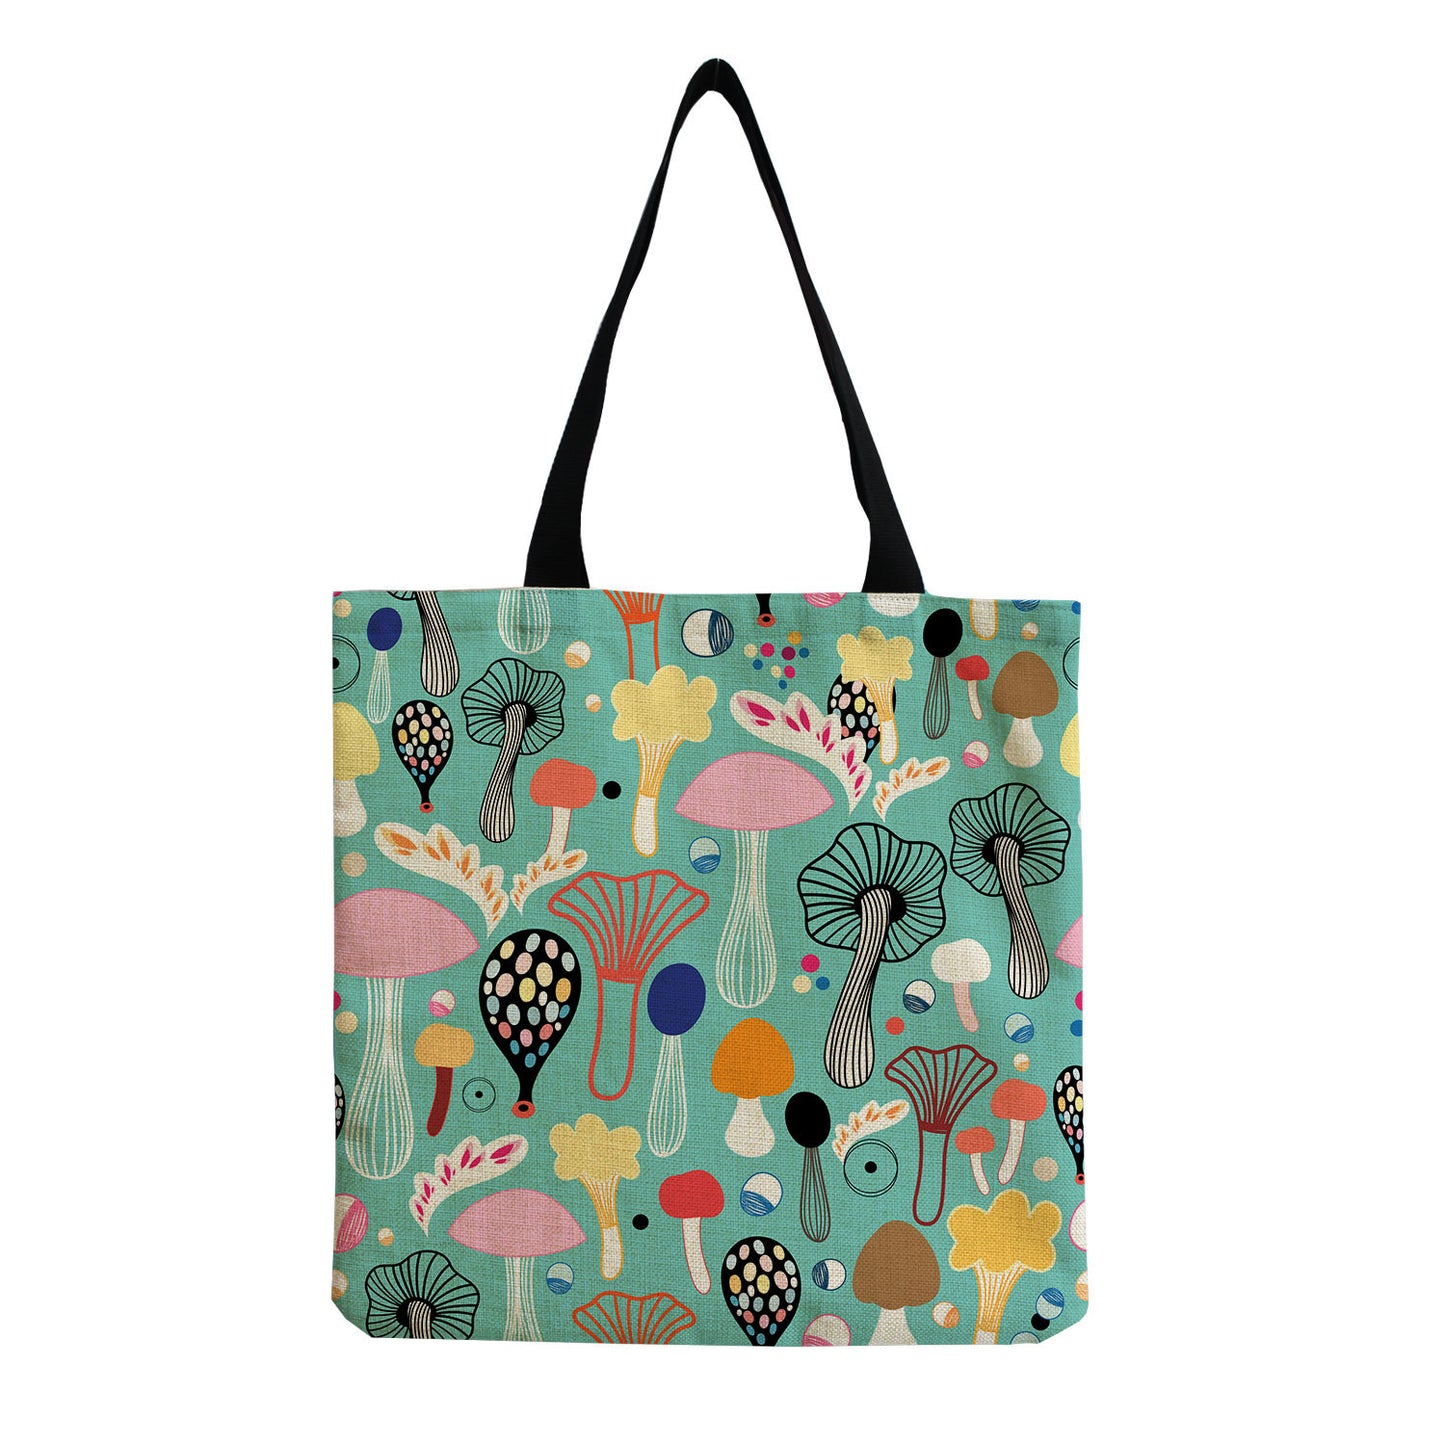 SproutBags Mushroom One-shoulder Portable Reusable Cute Totebag